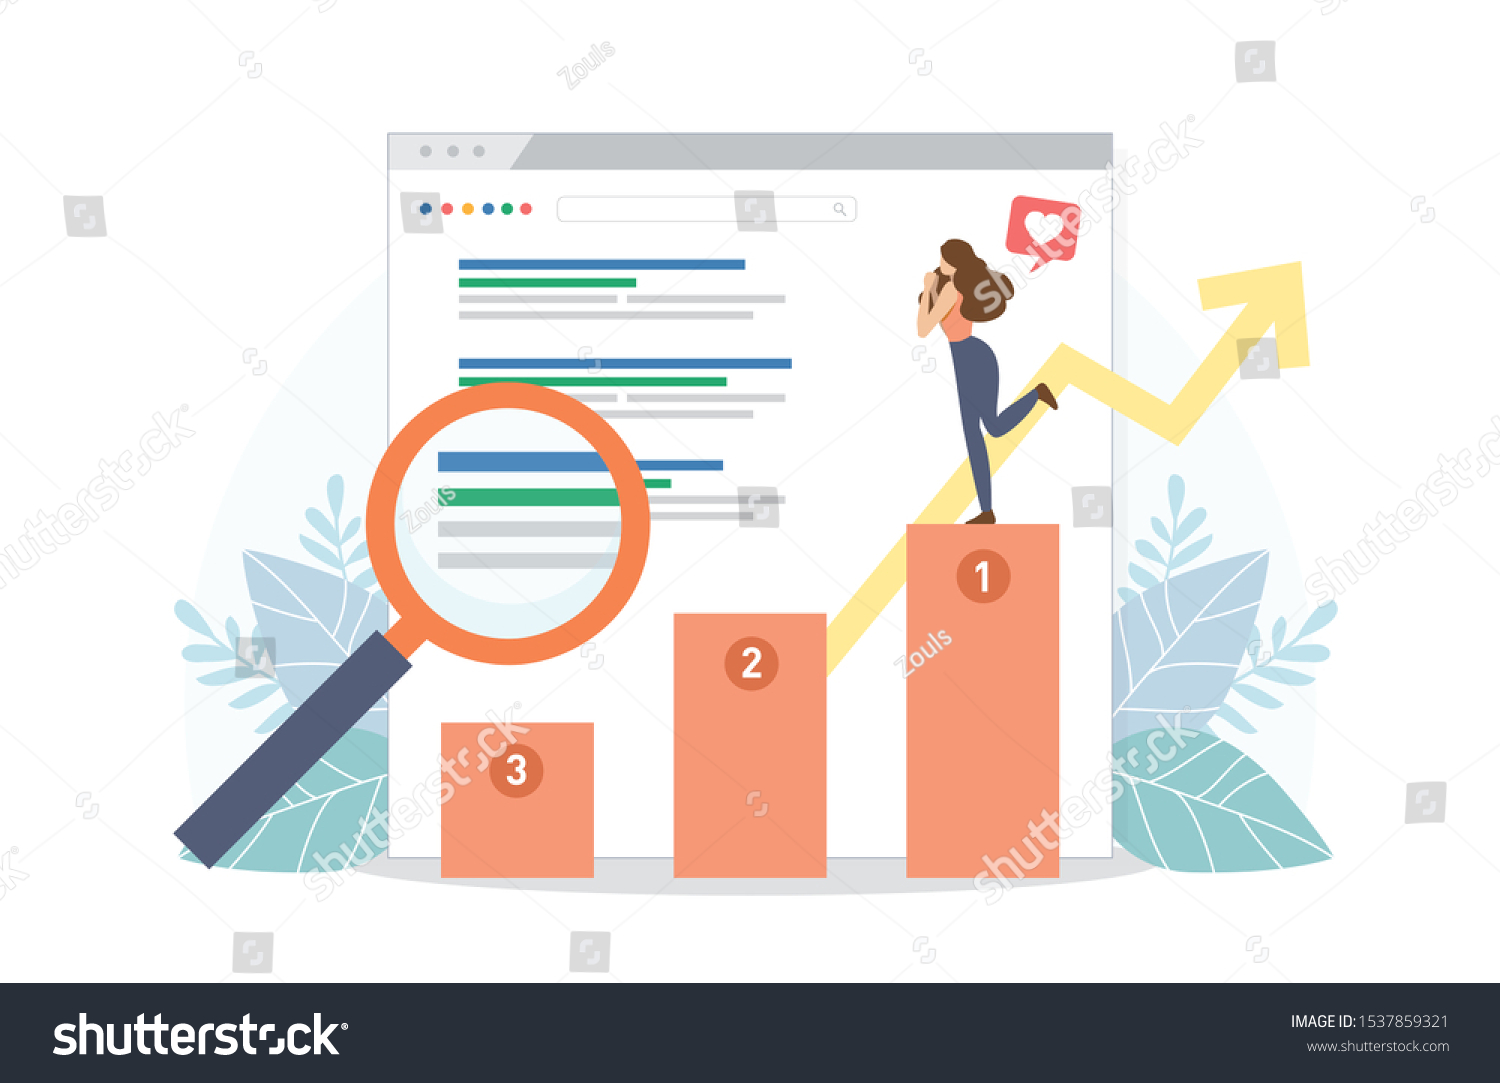 Happy woman stand on SEO top ranking dock. Google search screen with magnifier . Vector illustration flat design style. SEO, Search Engine Optimization, Top ranking Concept. #1537859321